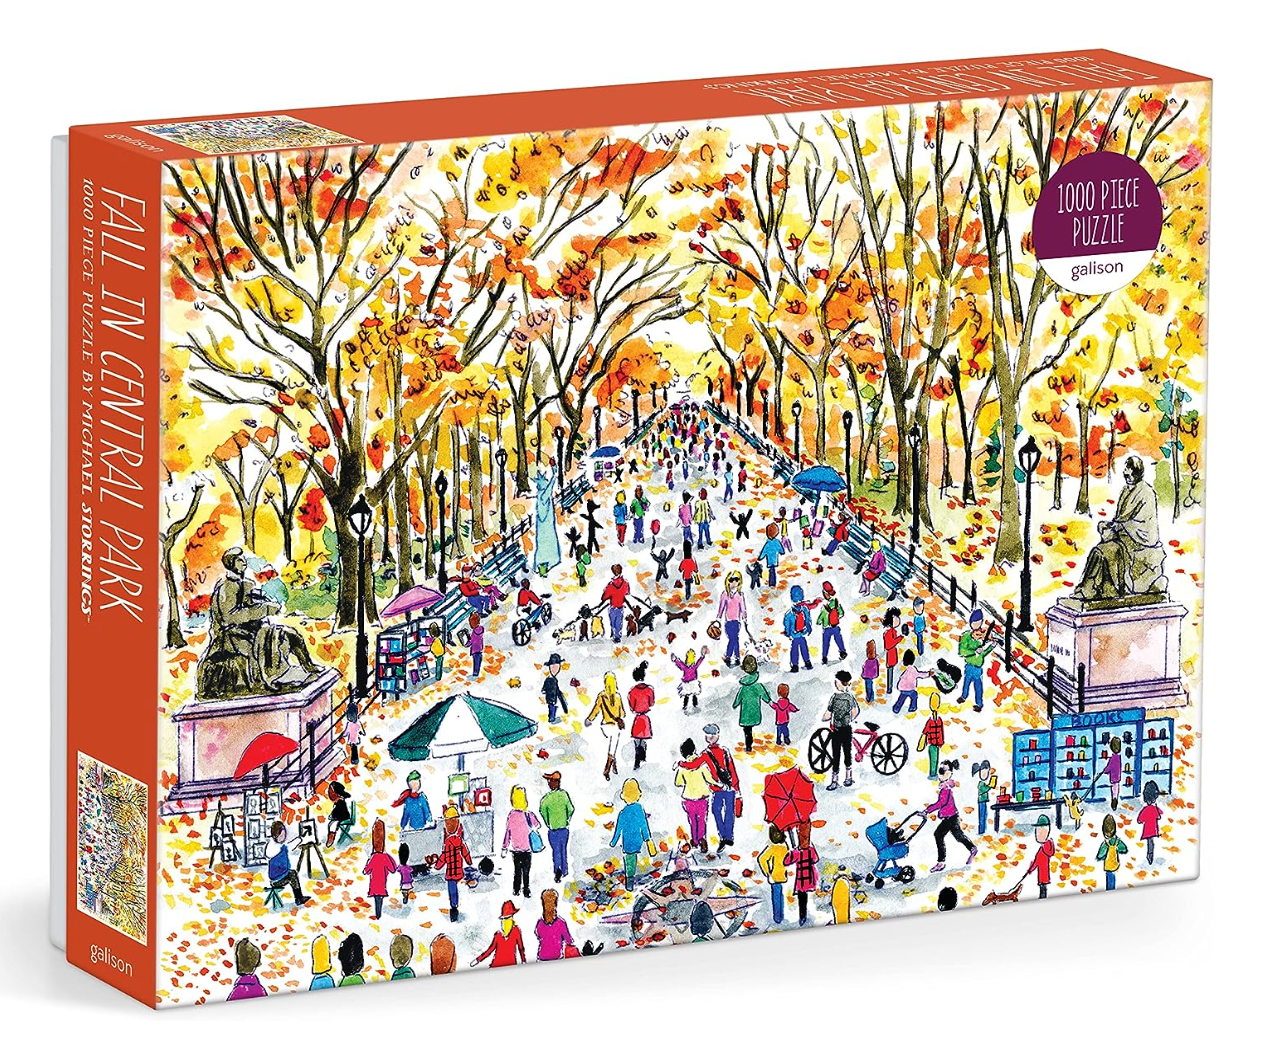 Michael Storrings' Fall In Central Park, 1000 Piece Puzzle